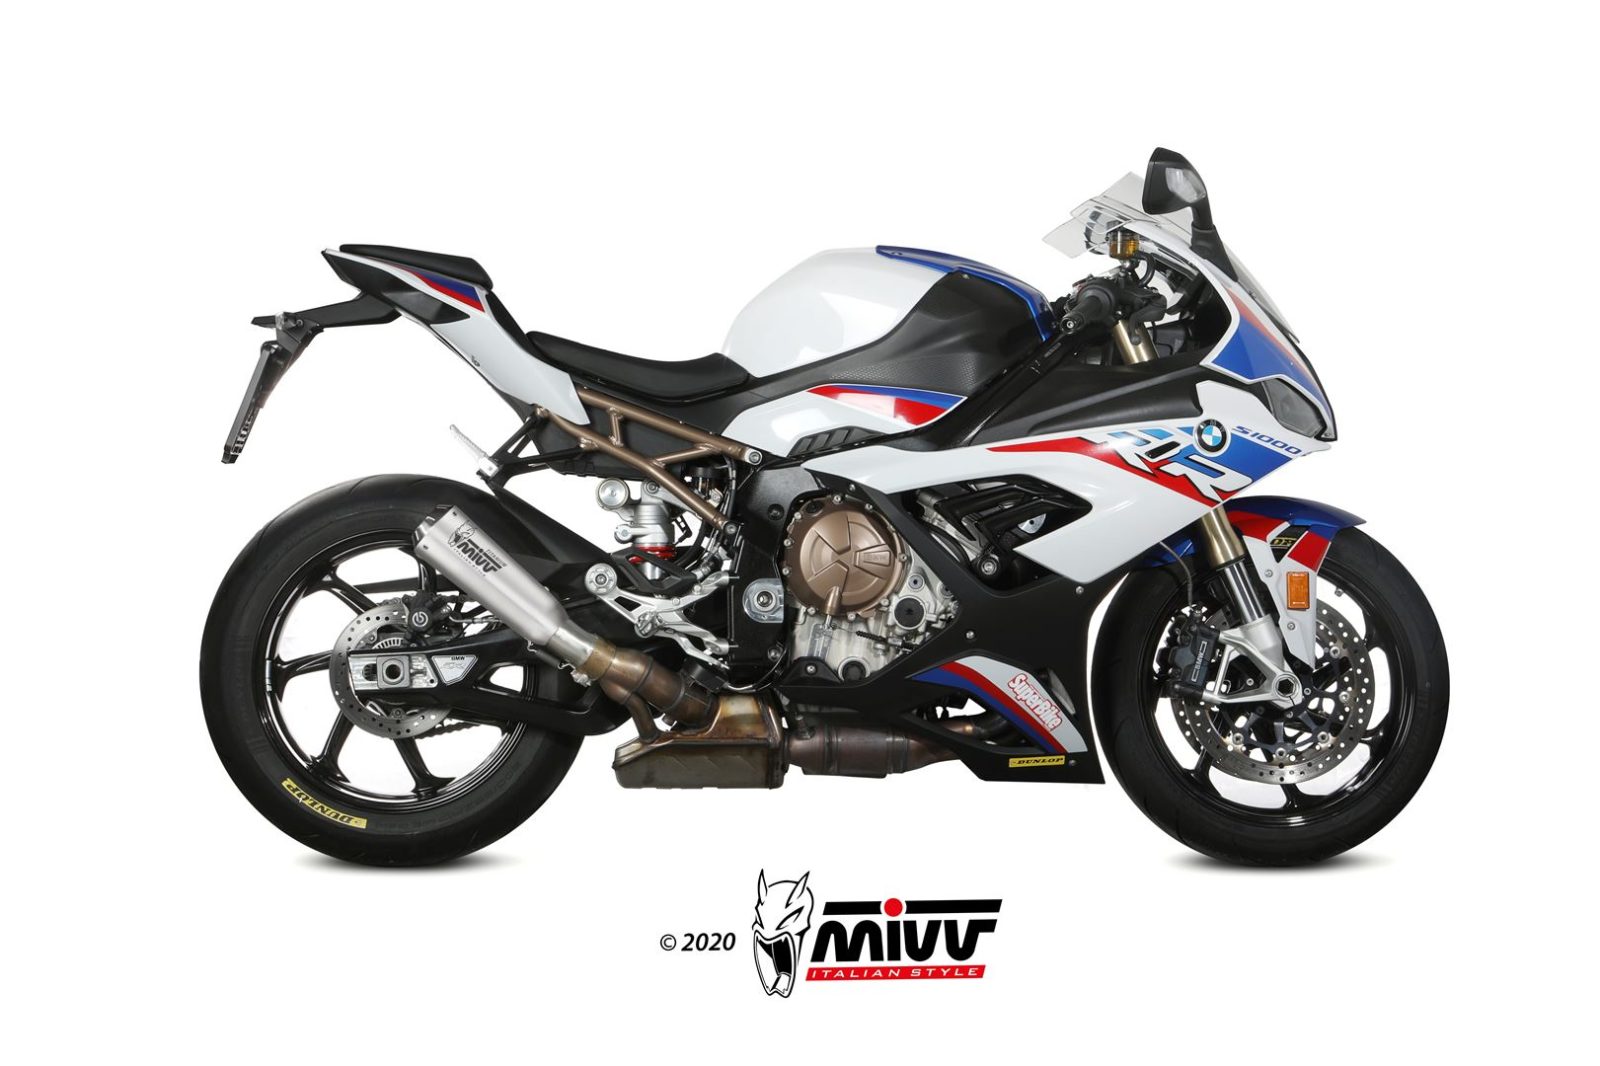 BMW_S1000RR_2020_73B036LC4T_01